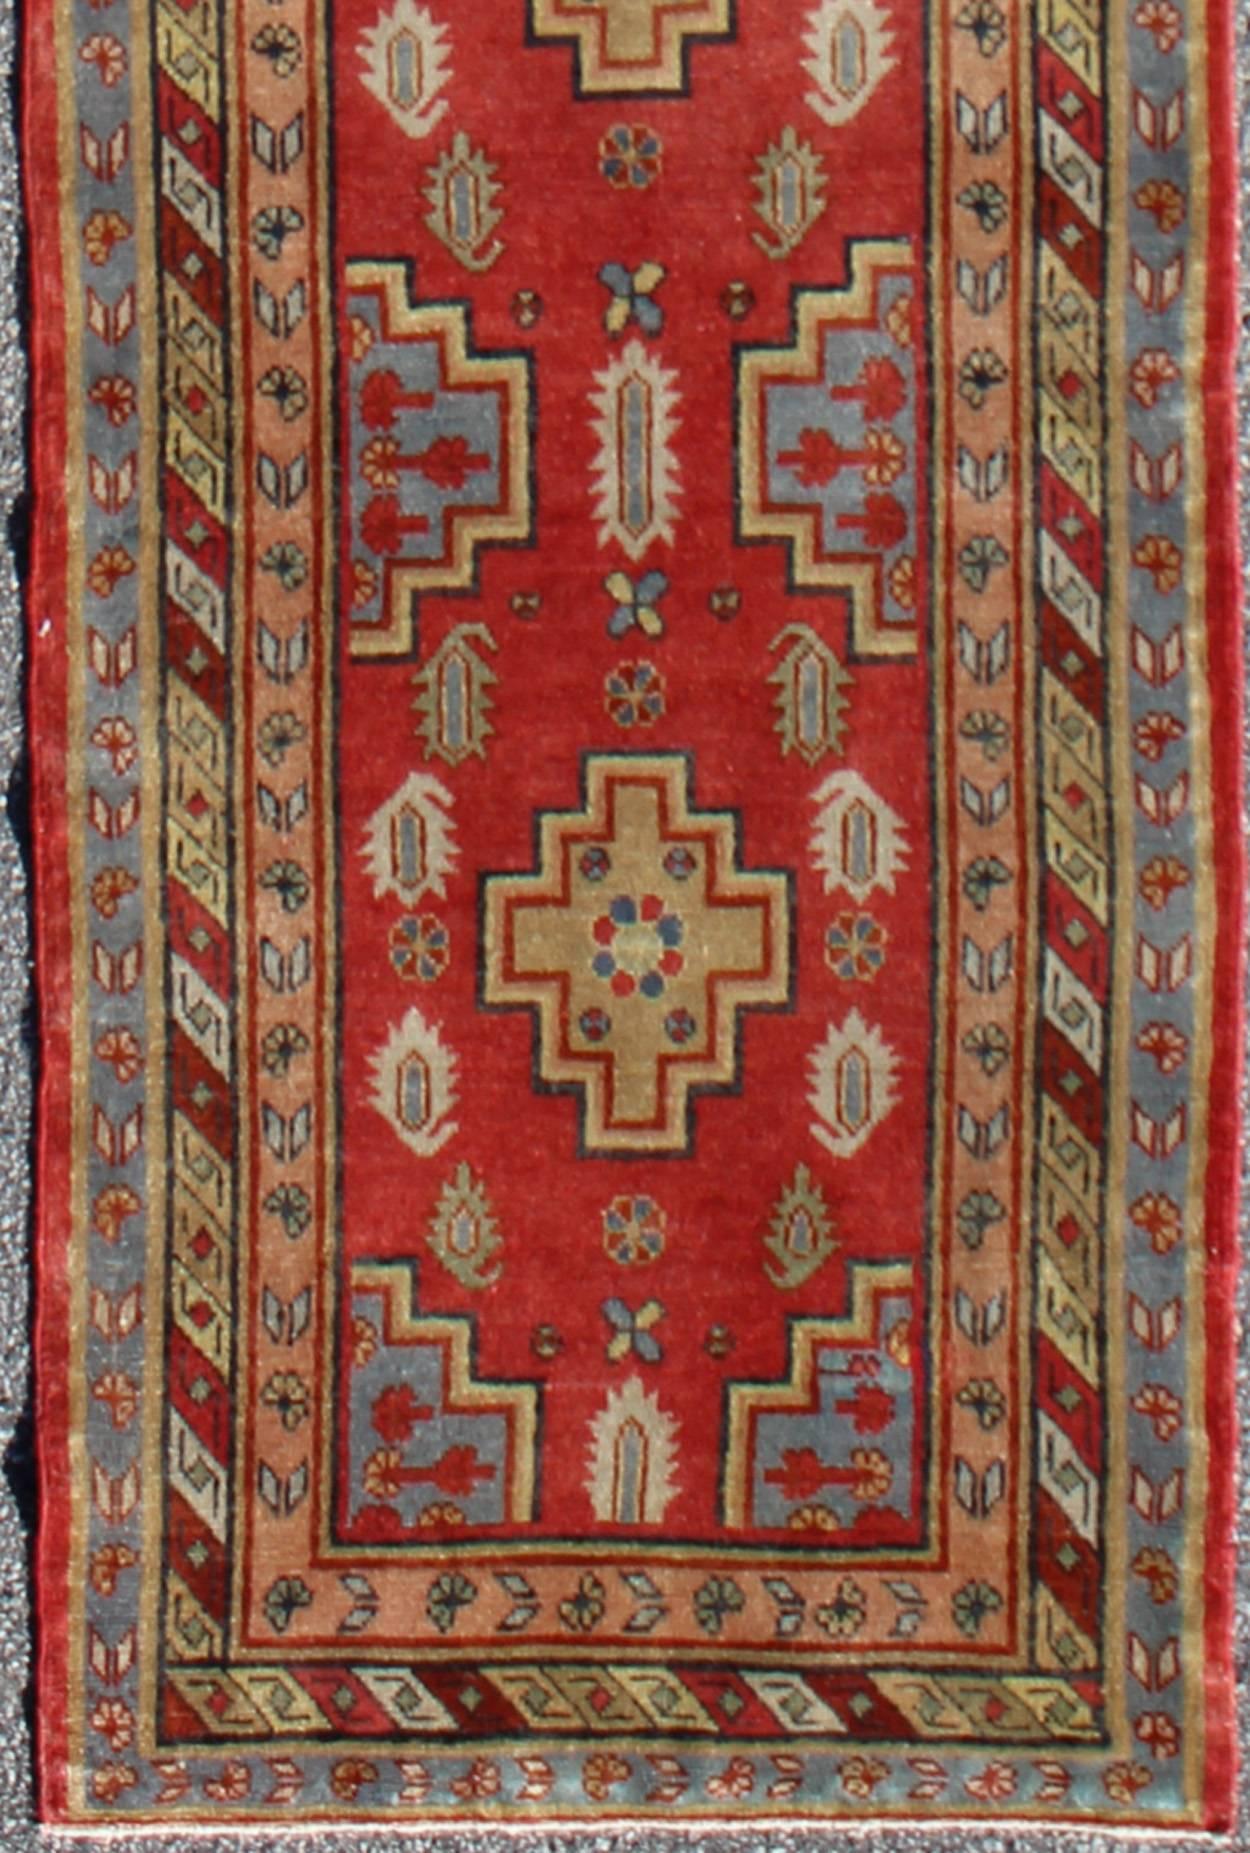 Antique Khotan Runner from Turkestan with four geometric medallions in red and multi colors, rug tu-mtu-4648, country of origin / type: East Turkestan / Khotan, circa 1920

This geometric antique Khotan rug was handcrafted in Turkestan during the